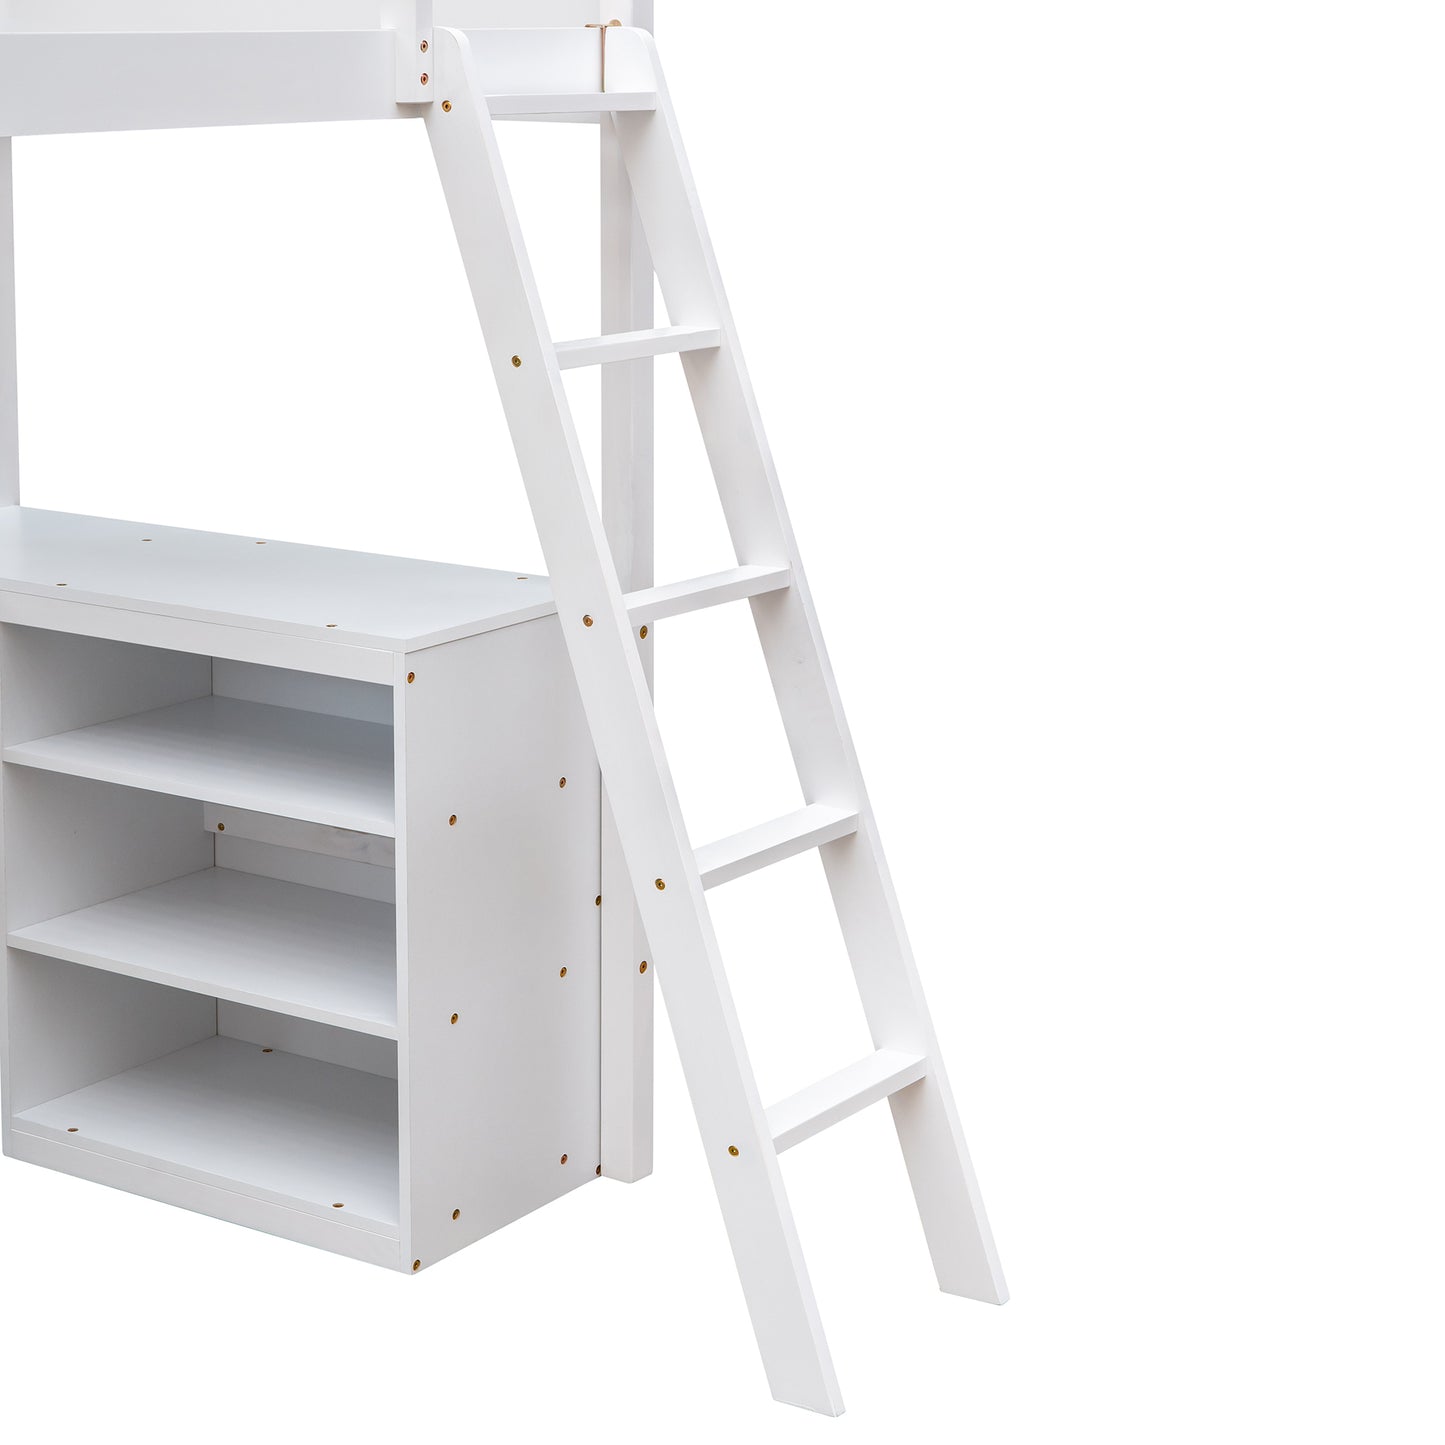 Twin size Loft Bed with Shelves and Desk, Wooden Loft Bed with Desk - White